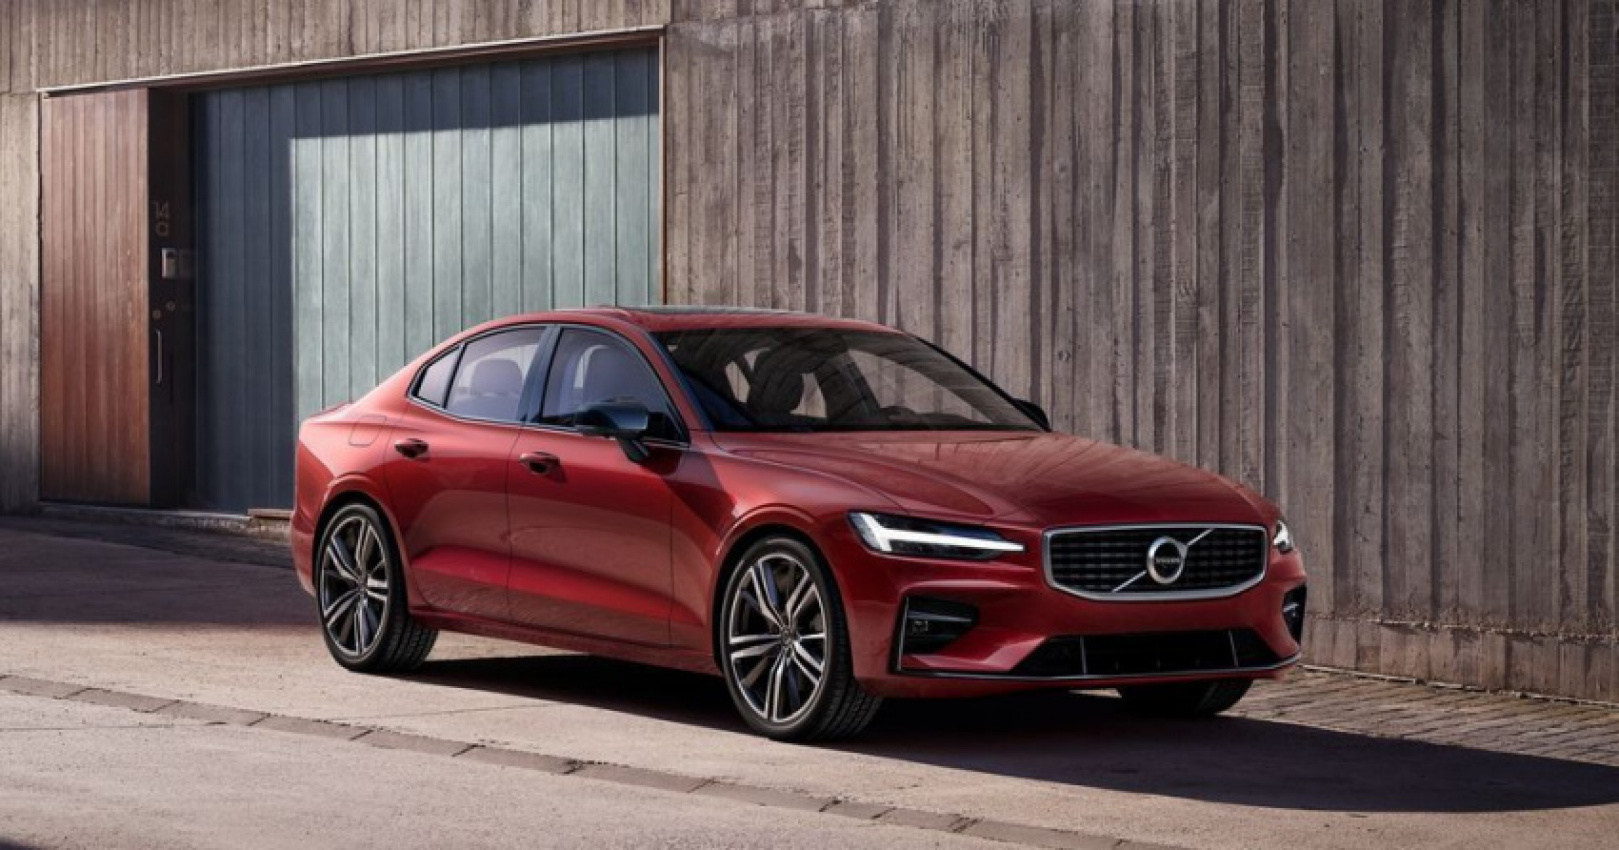 autos, cars, volvo, auto news, volvo s60, volvo s80, volvo recharged for 2020 after record-breaking 2019, s60 ckd and s90 facelift coming